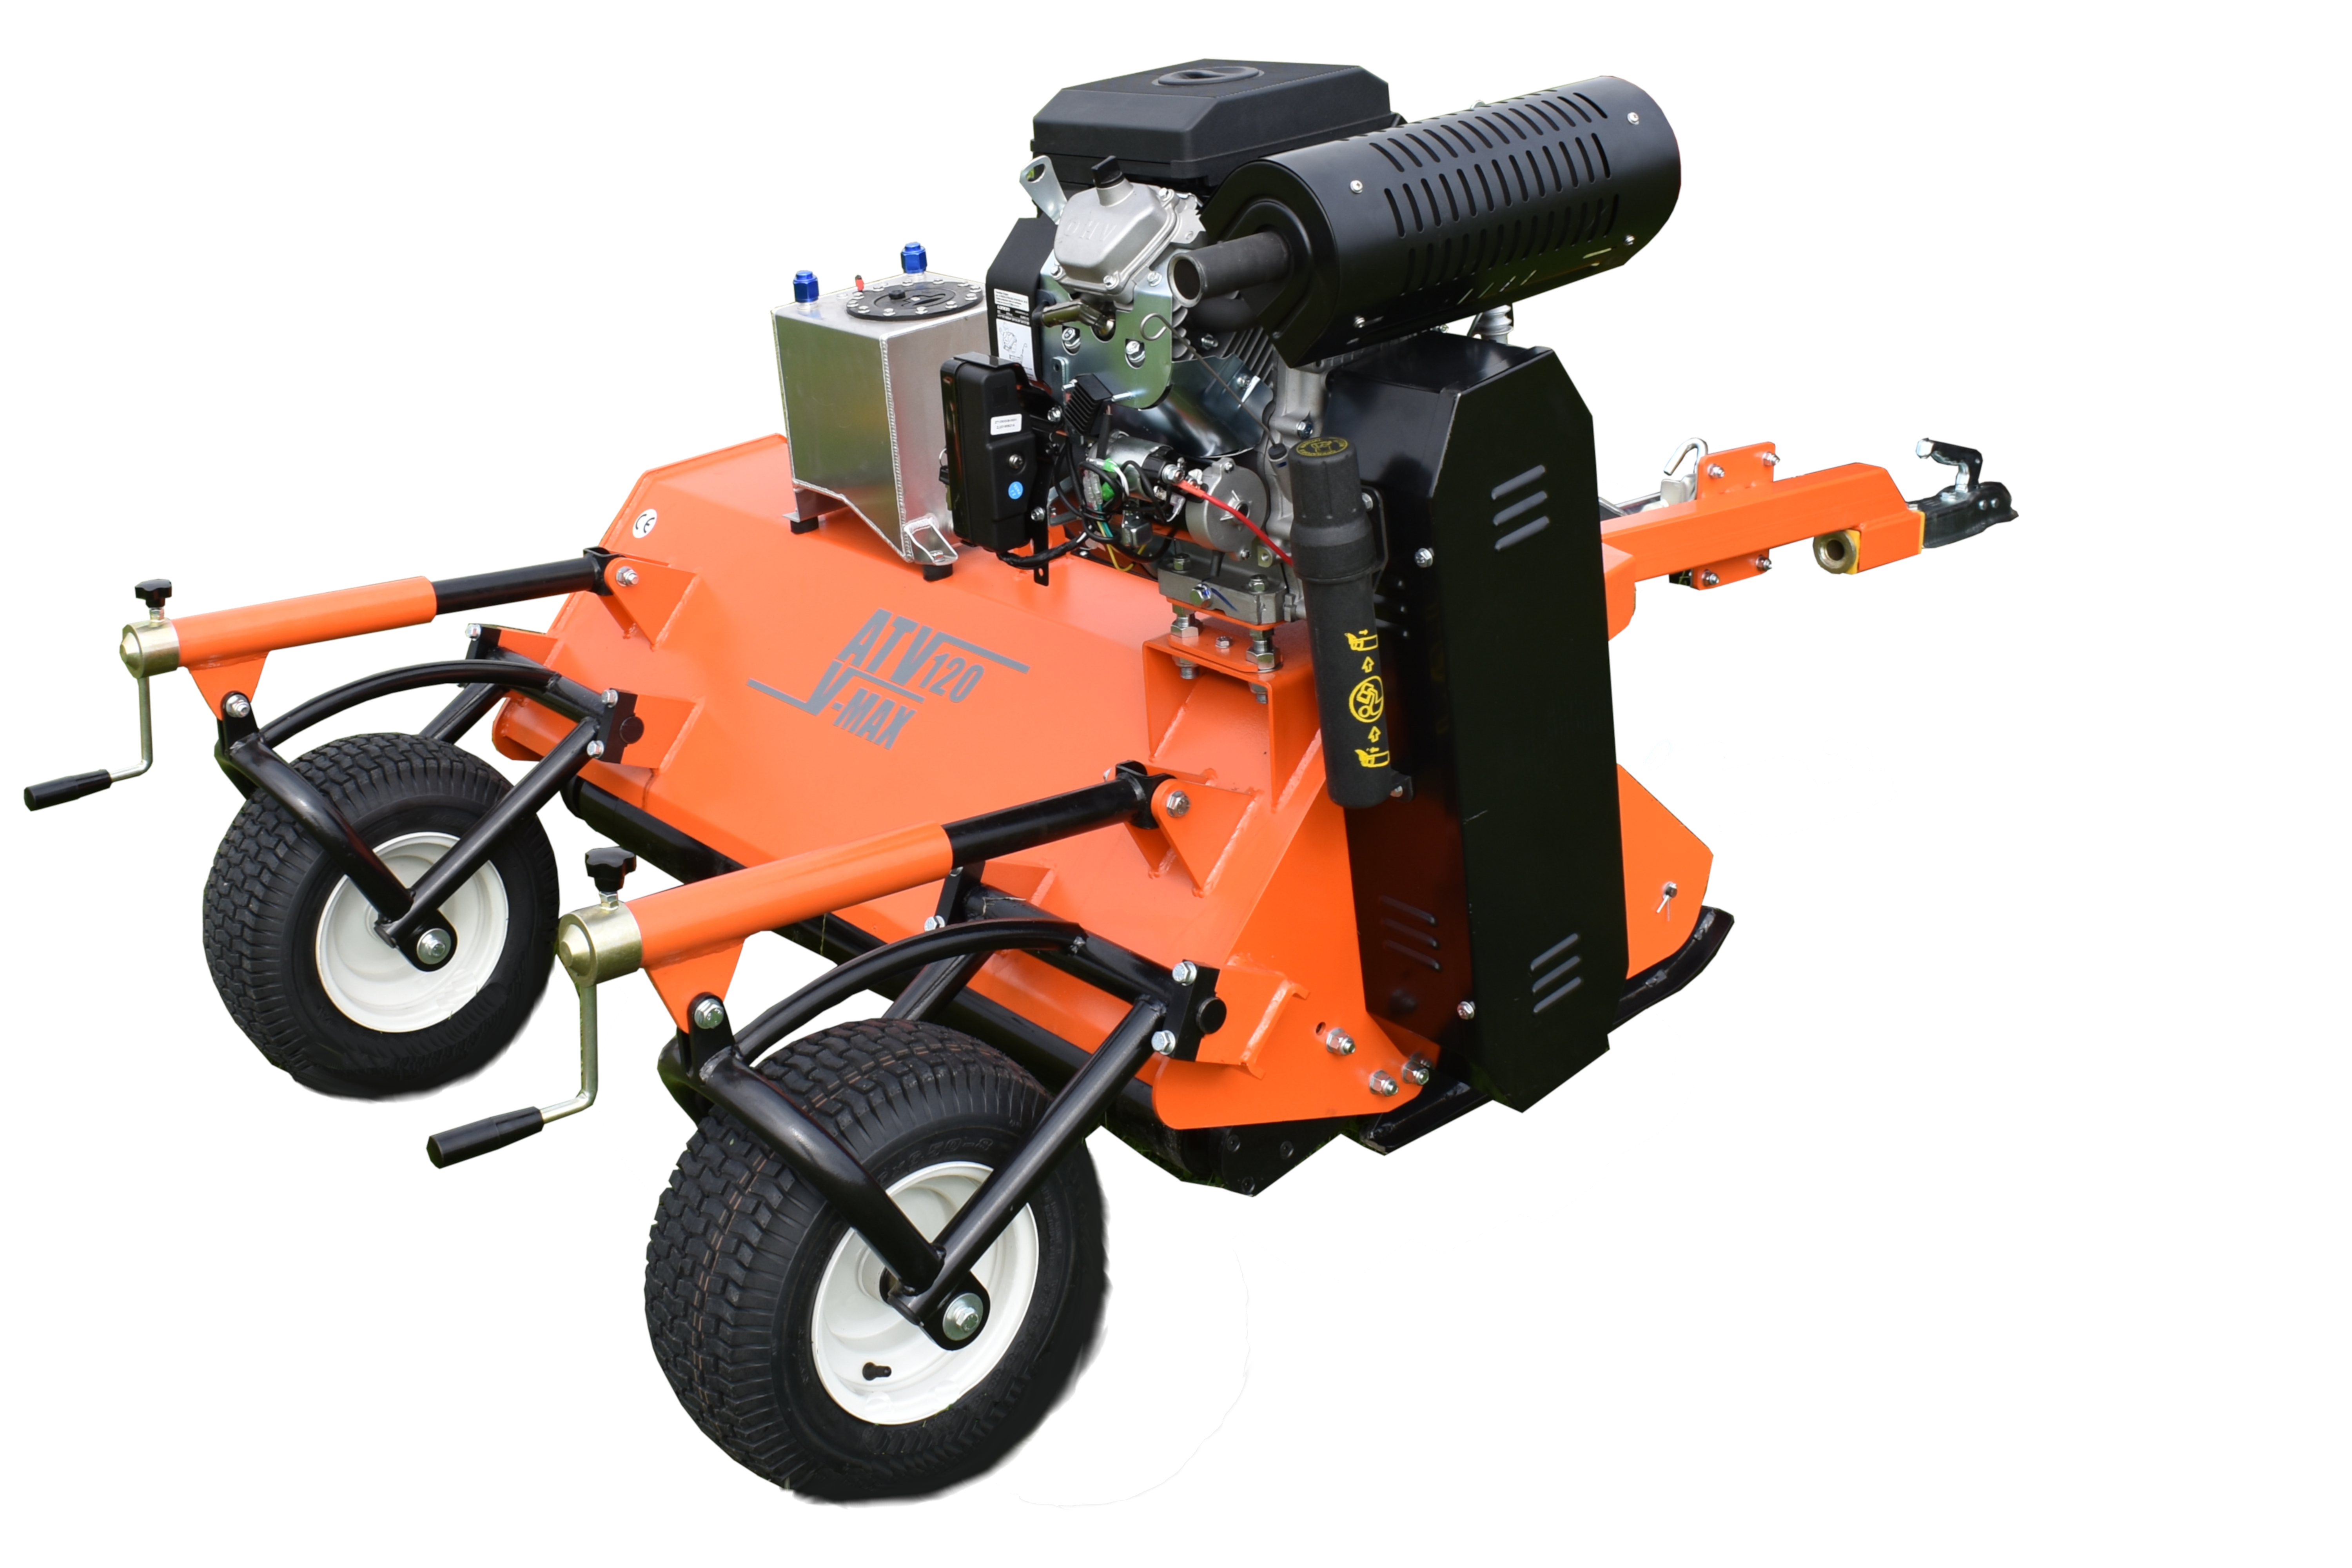 ATV Towable Flail Mower V-Twin 25HP Engine – ATV120 – 25HP – Flail Mowers – 3 Year Warranty – MDL Power Up